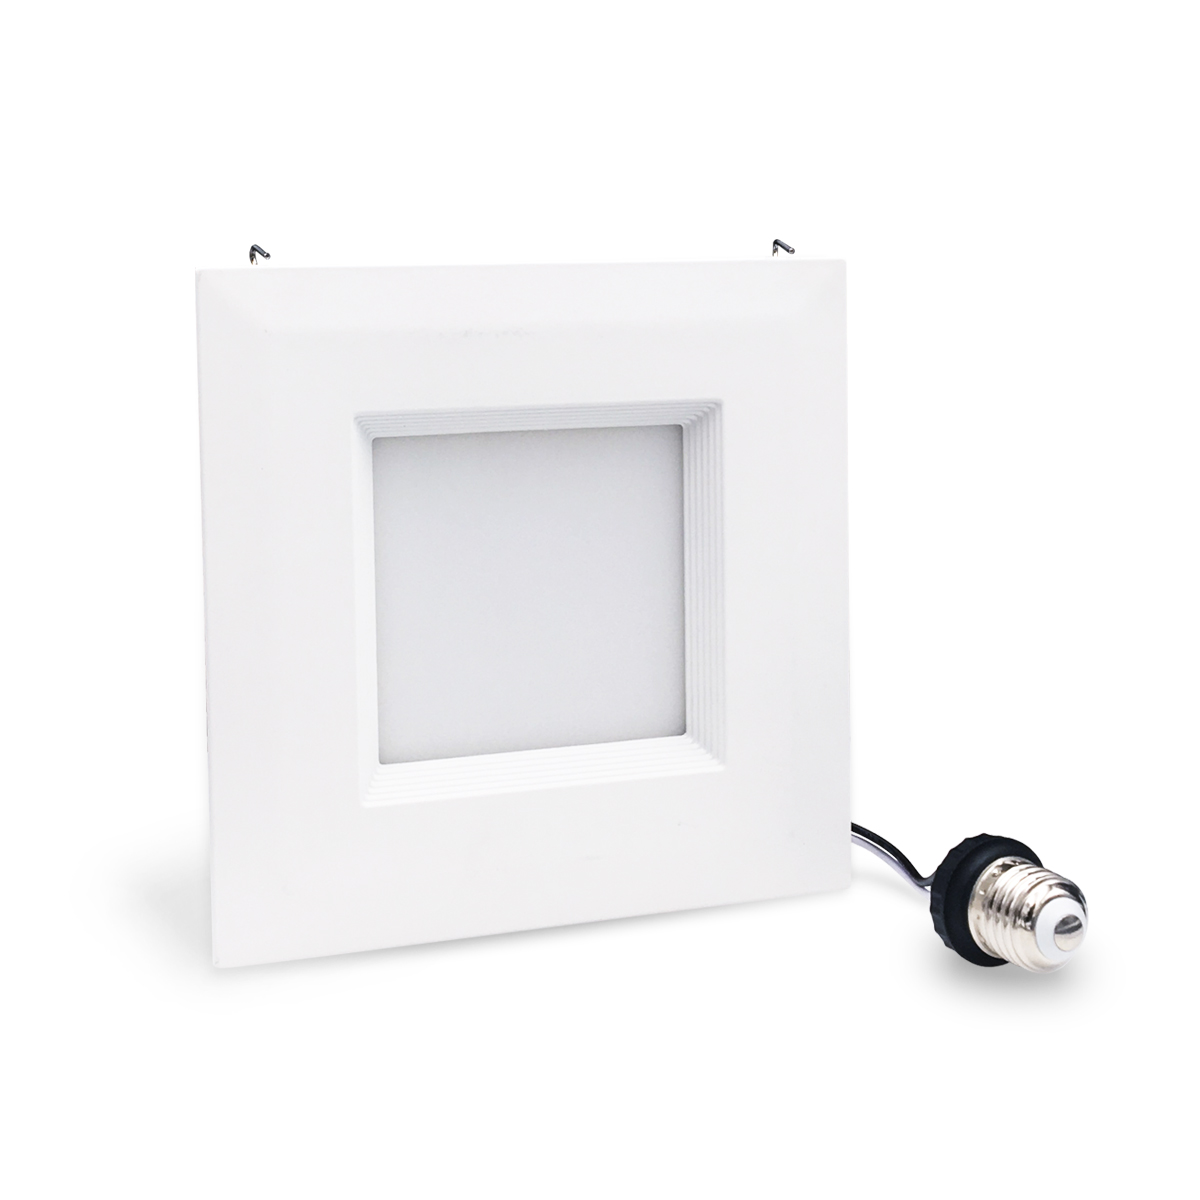 Homestar 6inch 15W Square Retrofit Downlight with ETL and ES Certification